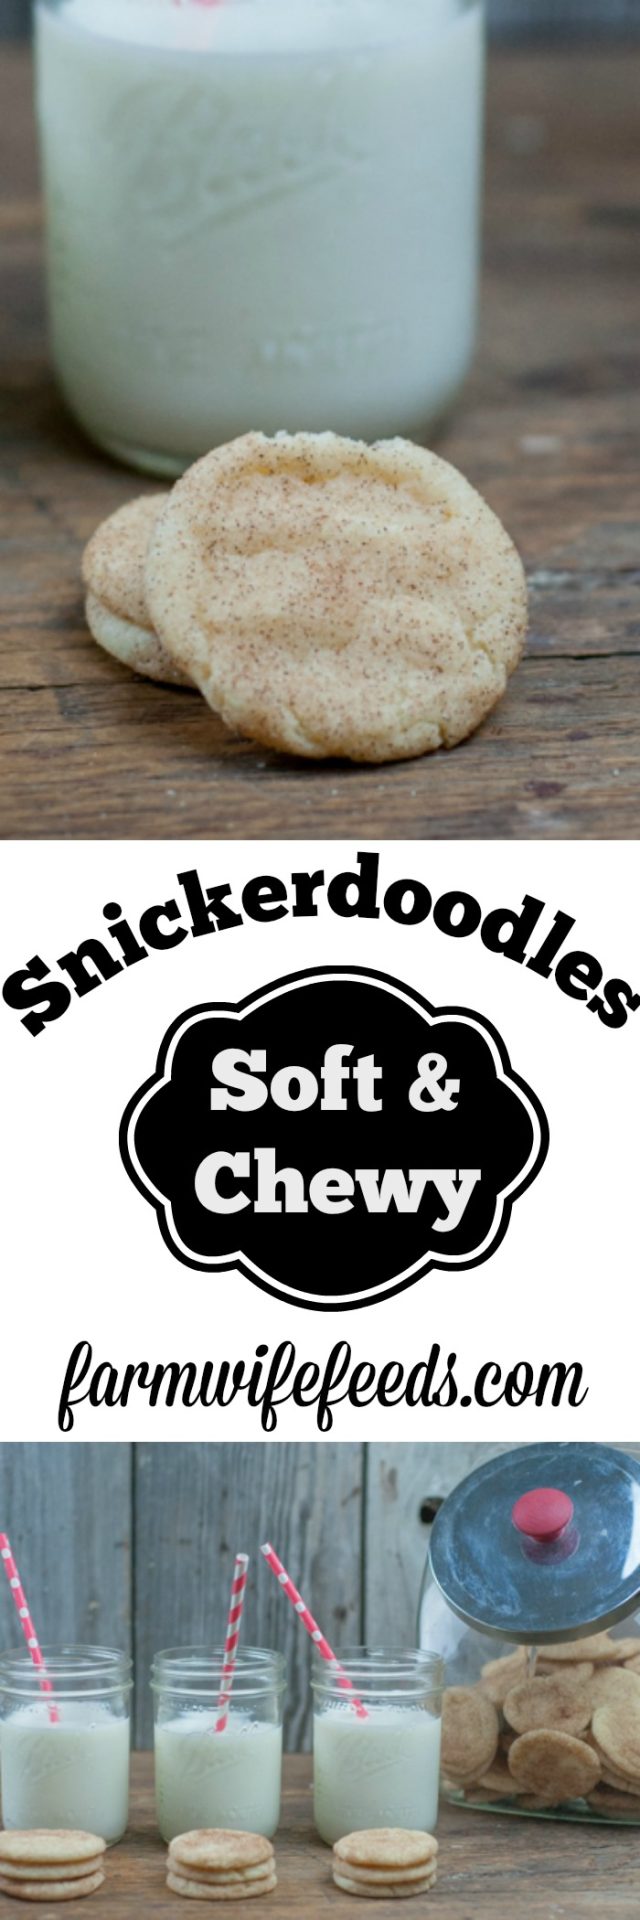 Soft and Chewy Snickerdoodles Cookies from Farmwife Feeds #recipe #cookies #snickerdoodle